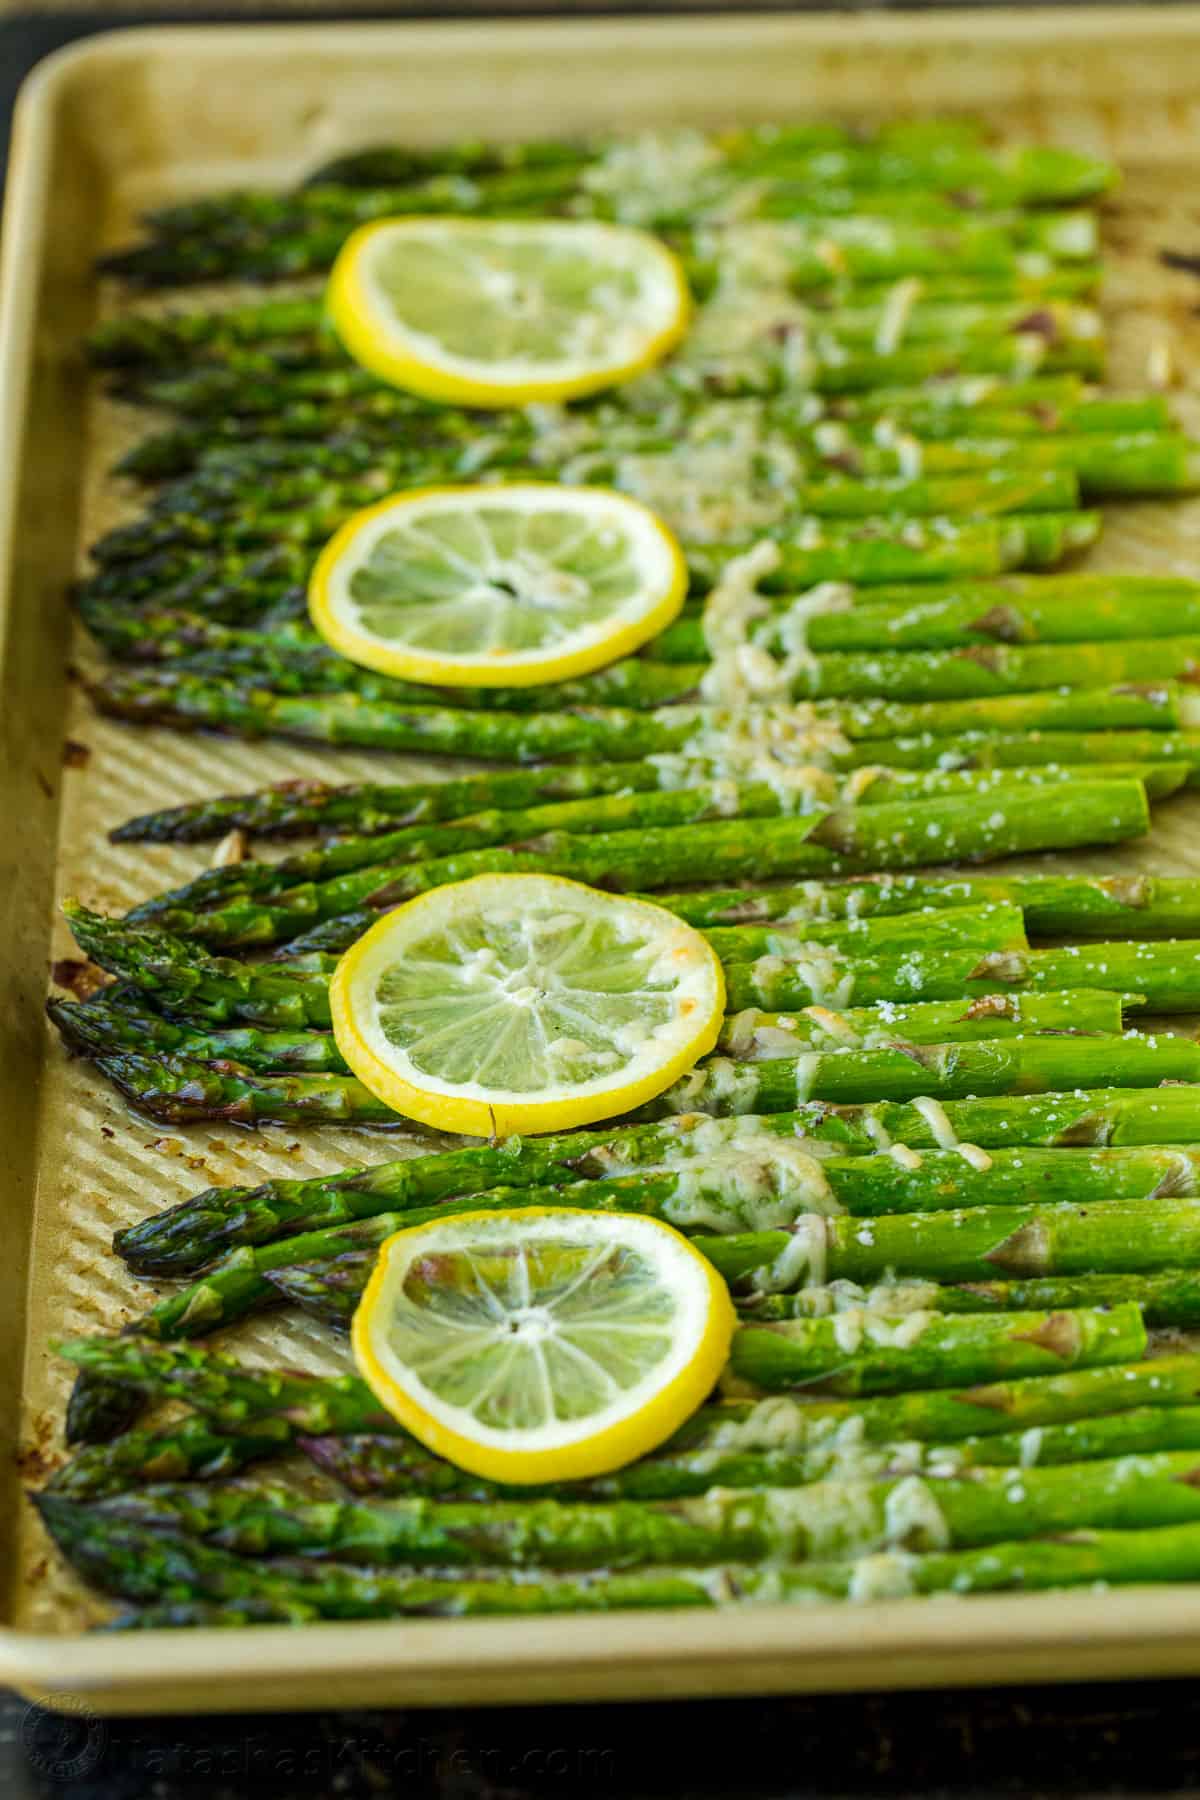 Roasted Asparagus with Lemon, Butter, and Parmesan from https://natashaskitchen.com/